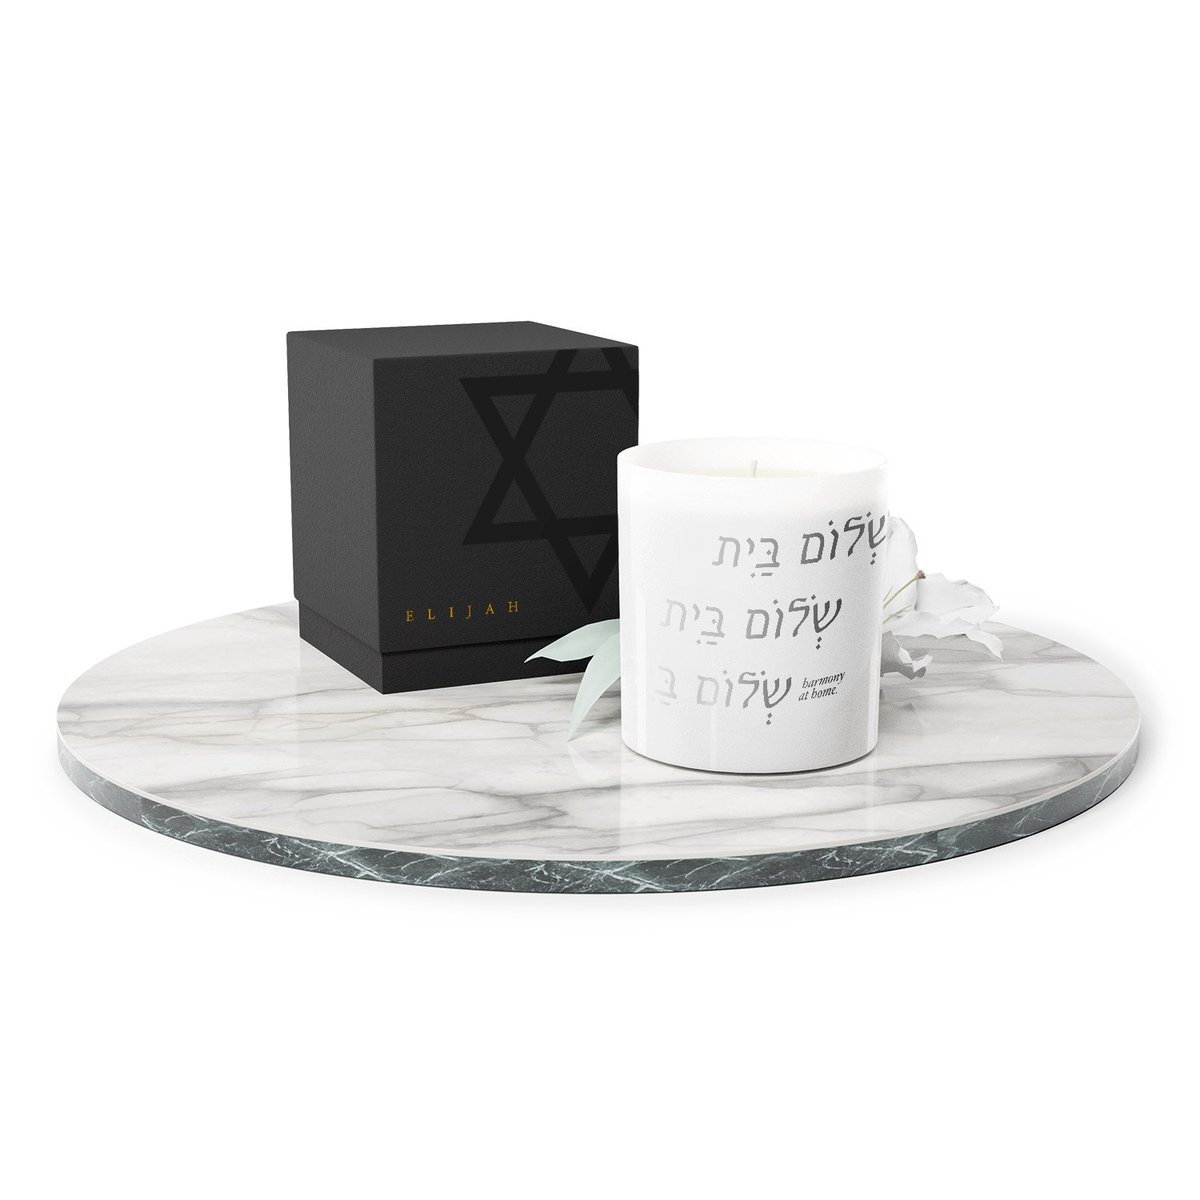 This candle has an aromatic floral clean note with green, fresh spicy facets which is sweet, cozy, and comforting. The fragrances of Lavender & Vanilla are meant to induce a calming nature and peace in the🏡